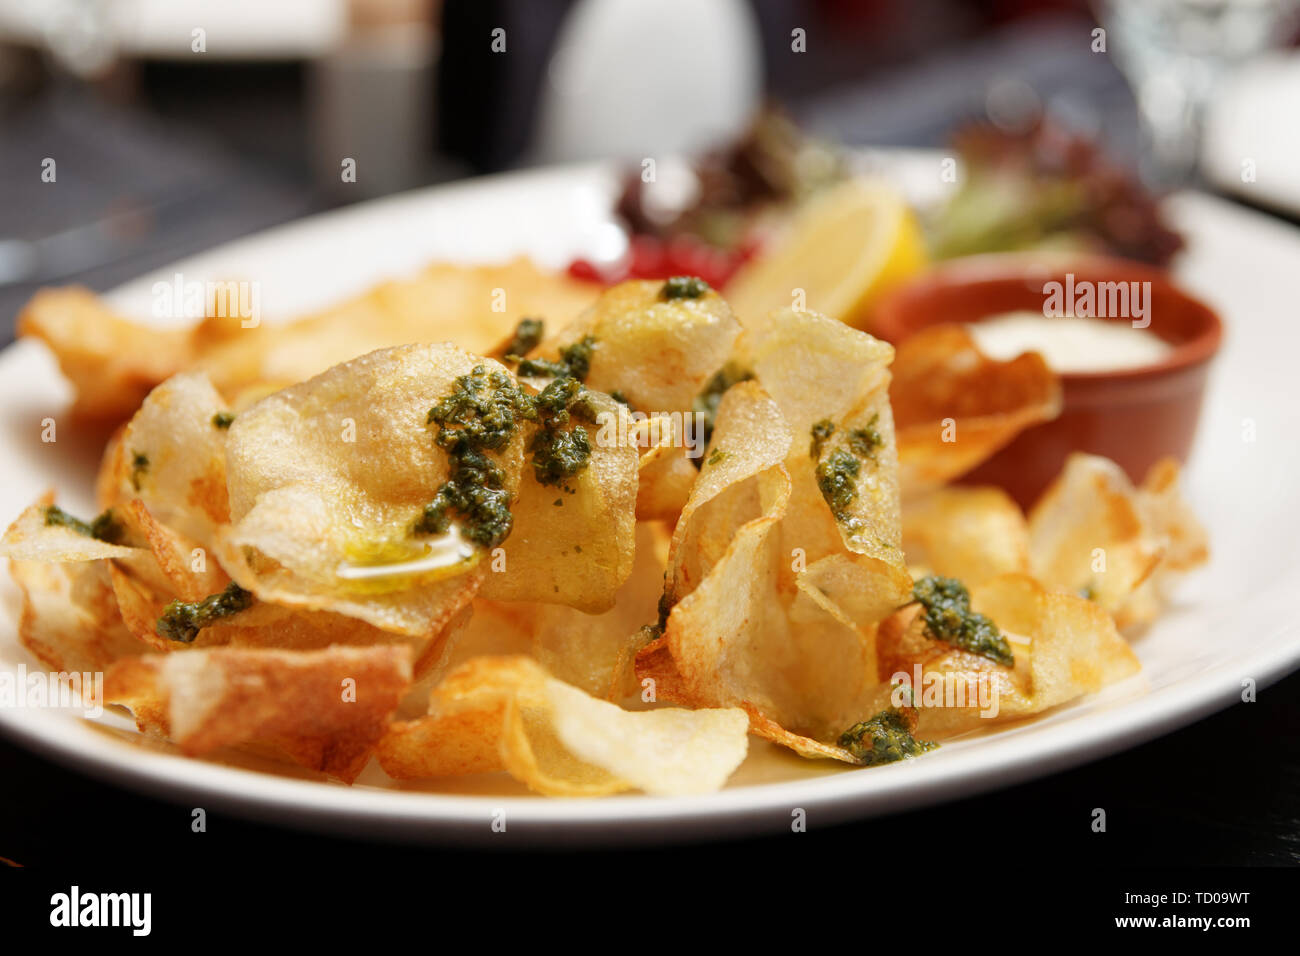 Fish and chips in plate, close-up Stock Photo